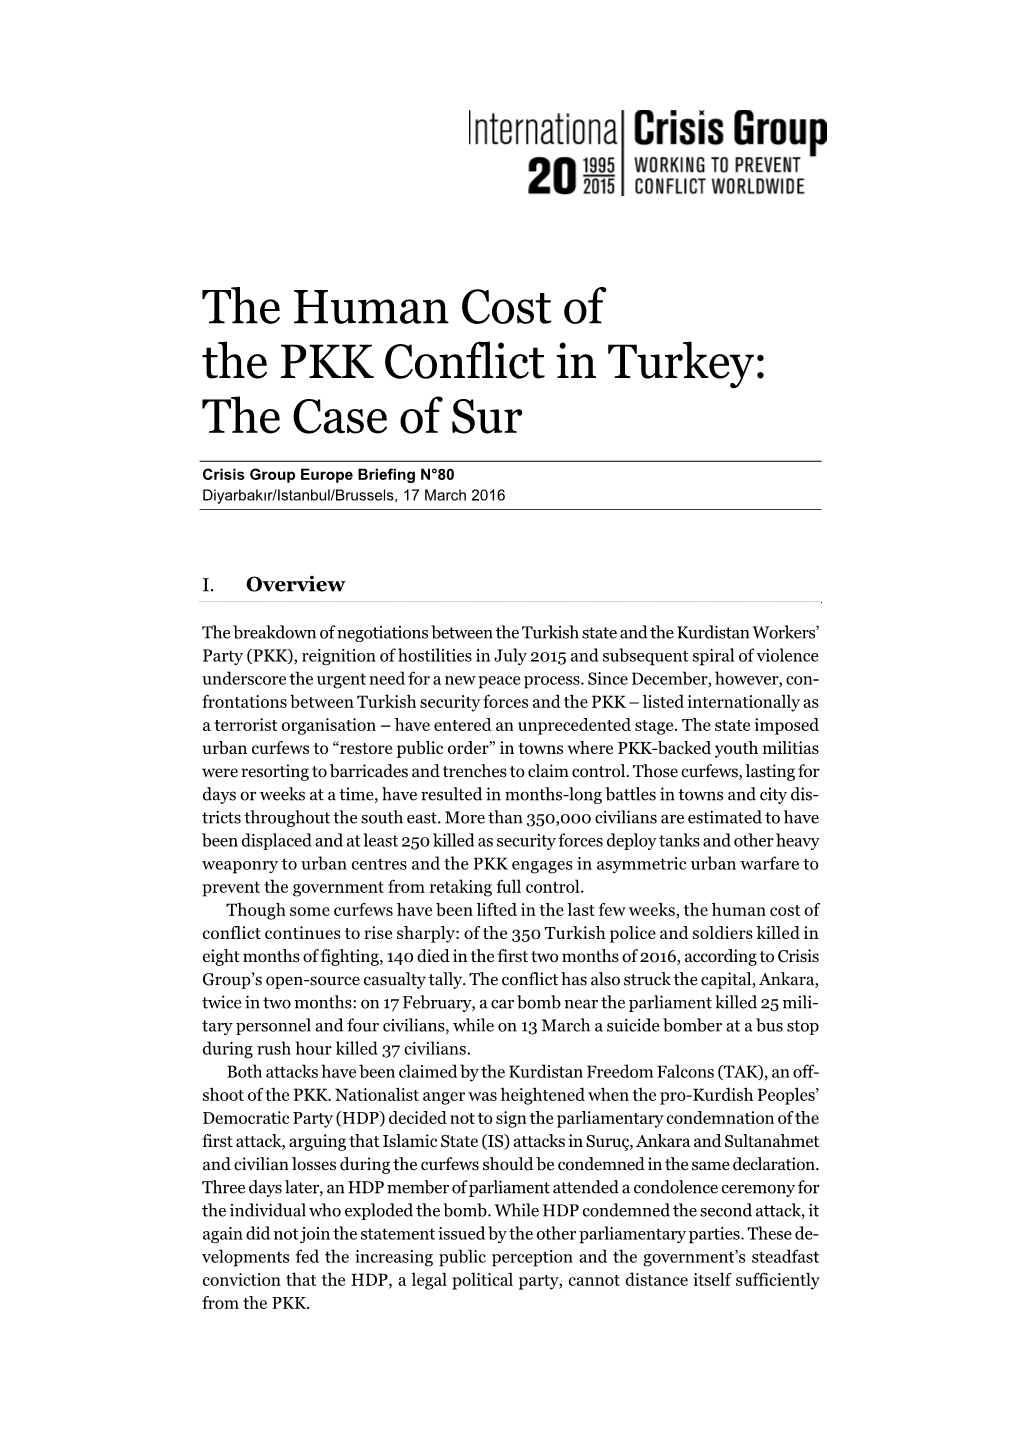 B080 the Human Cost of the PKK Conflict in Turkey